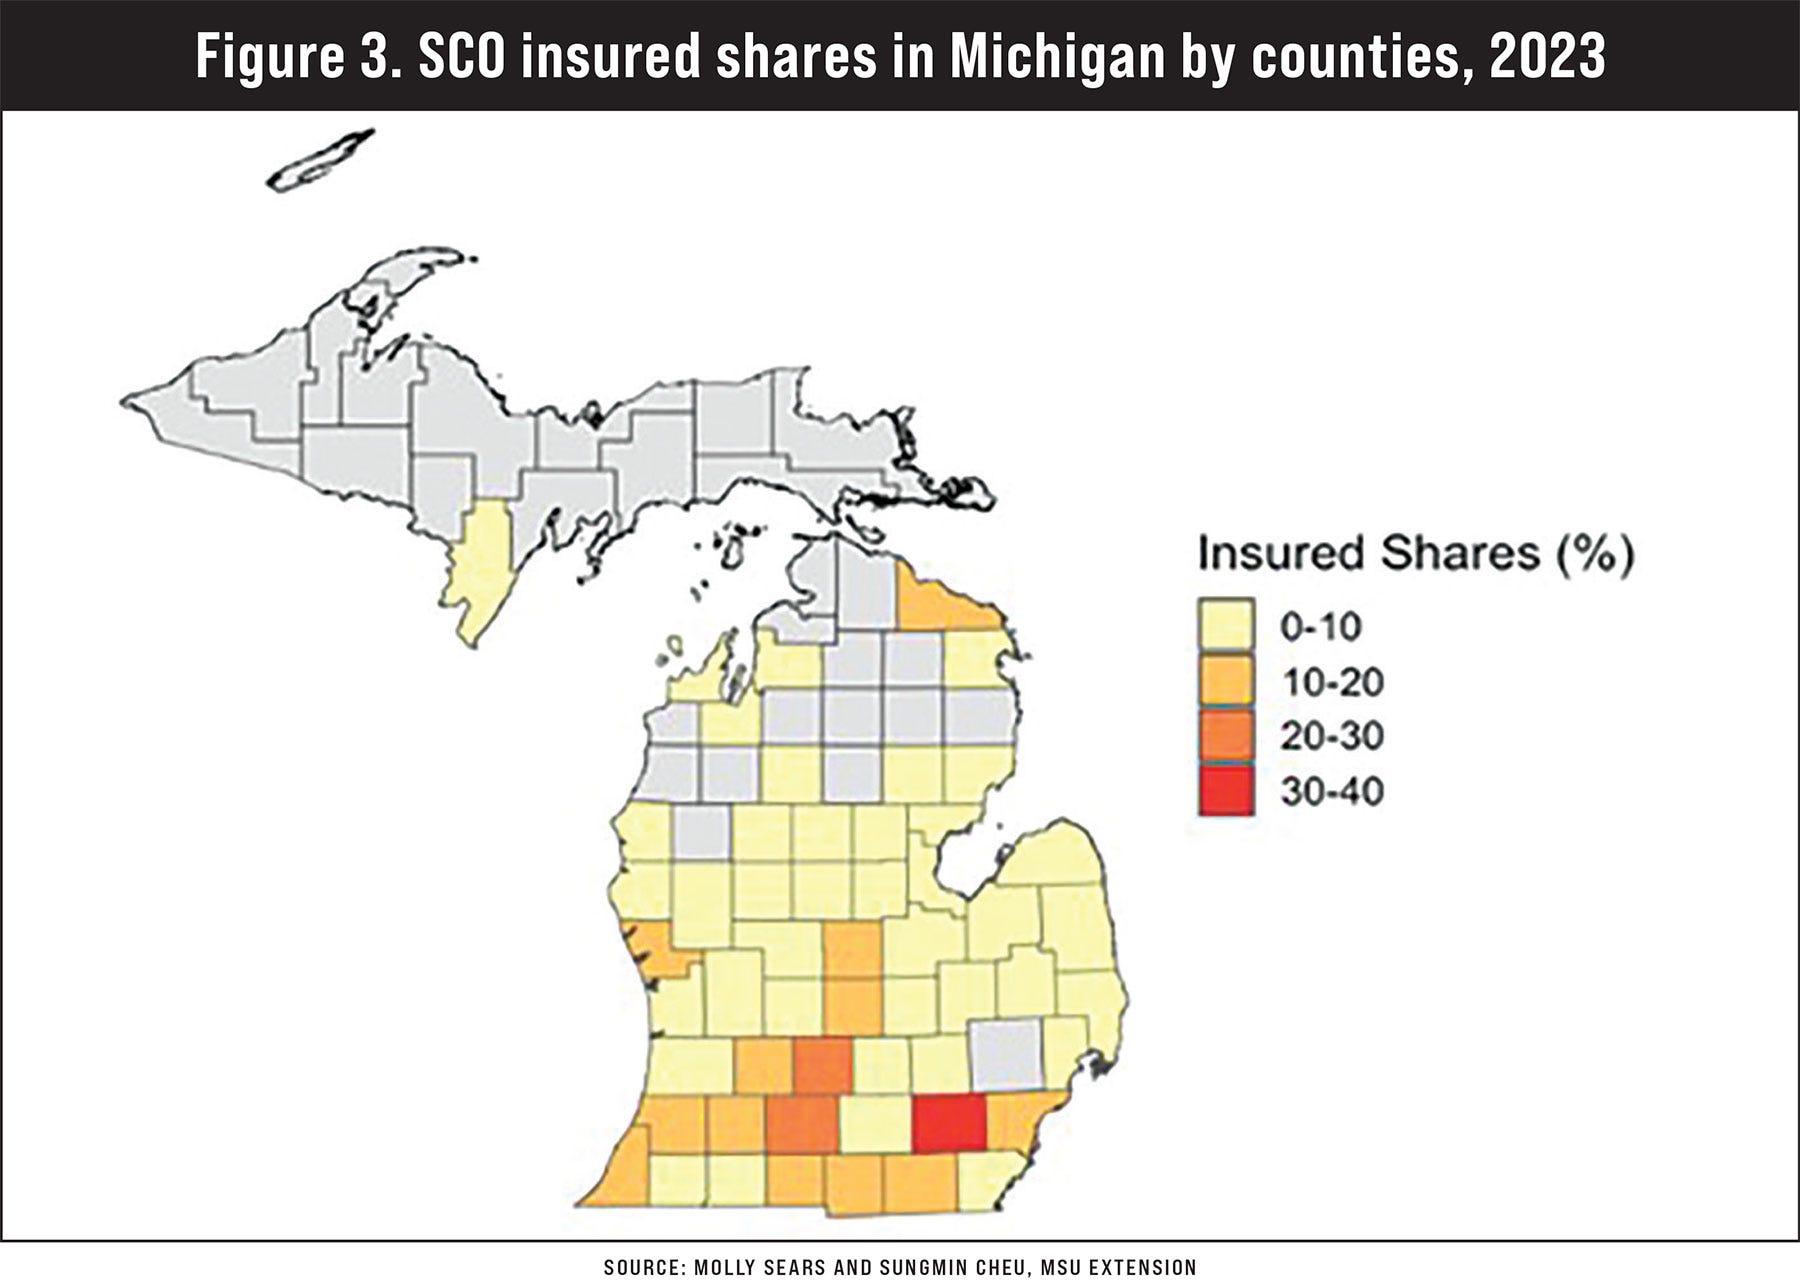 A map illustrating SCO insured shares in Michigan by counties in 2023